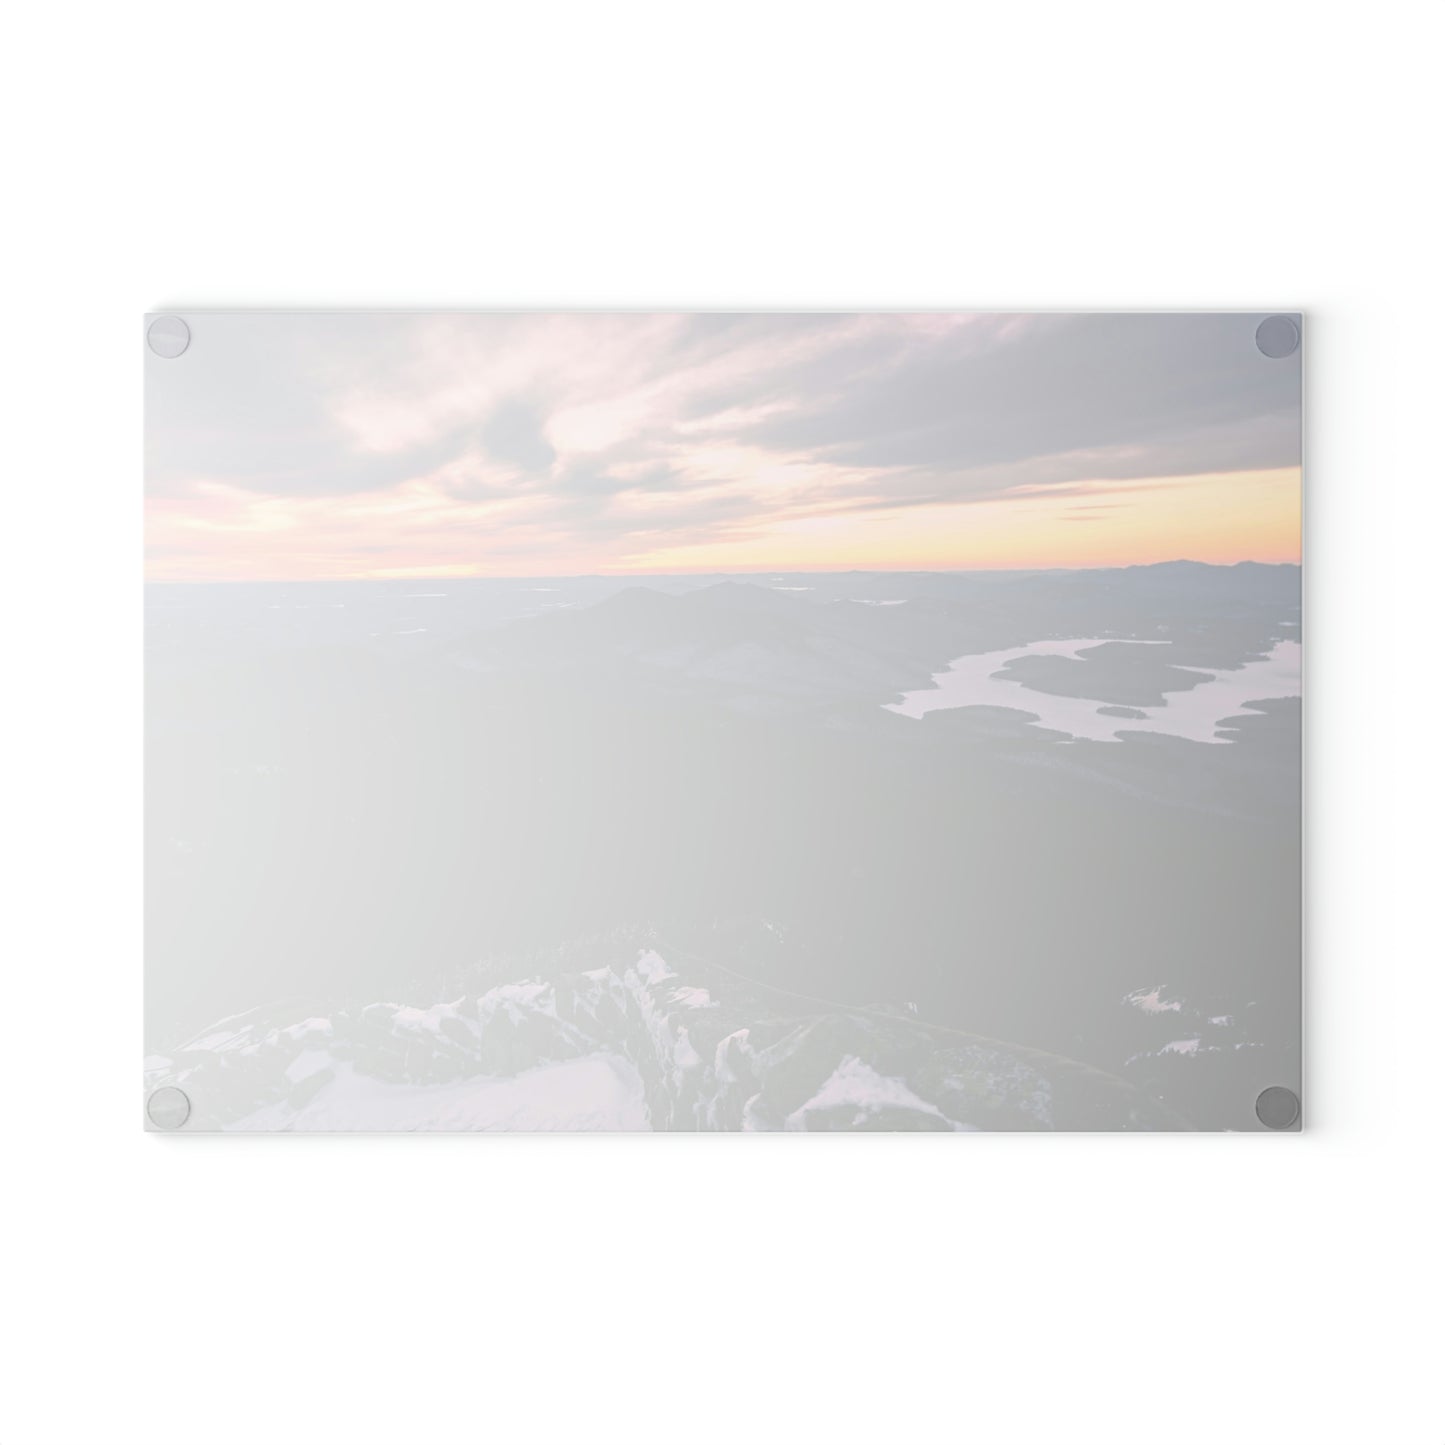 Glass Cutting Board - Lake Placid View, Whiteface Mt.